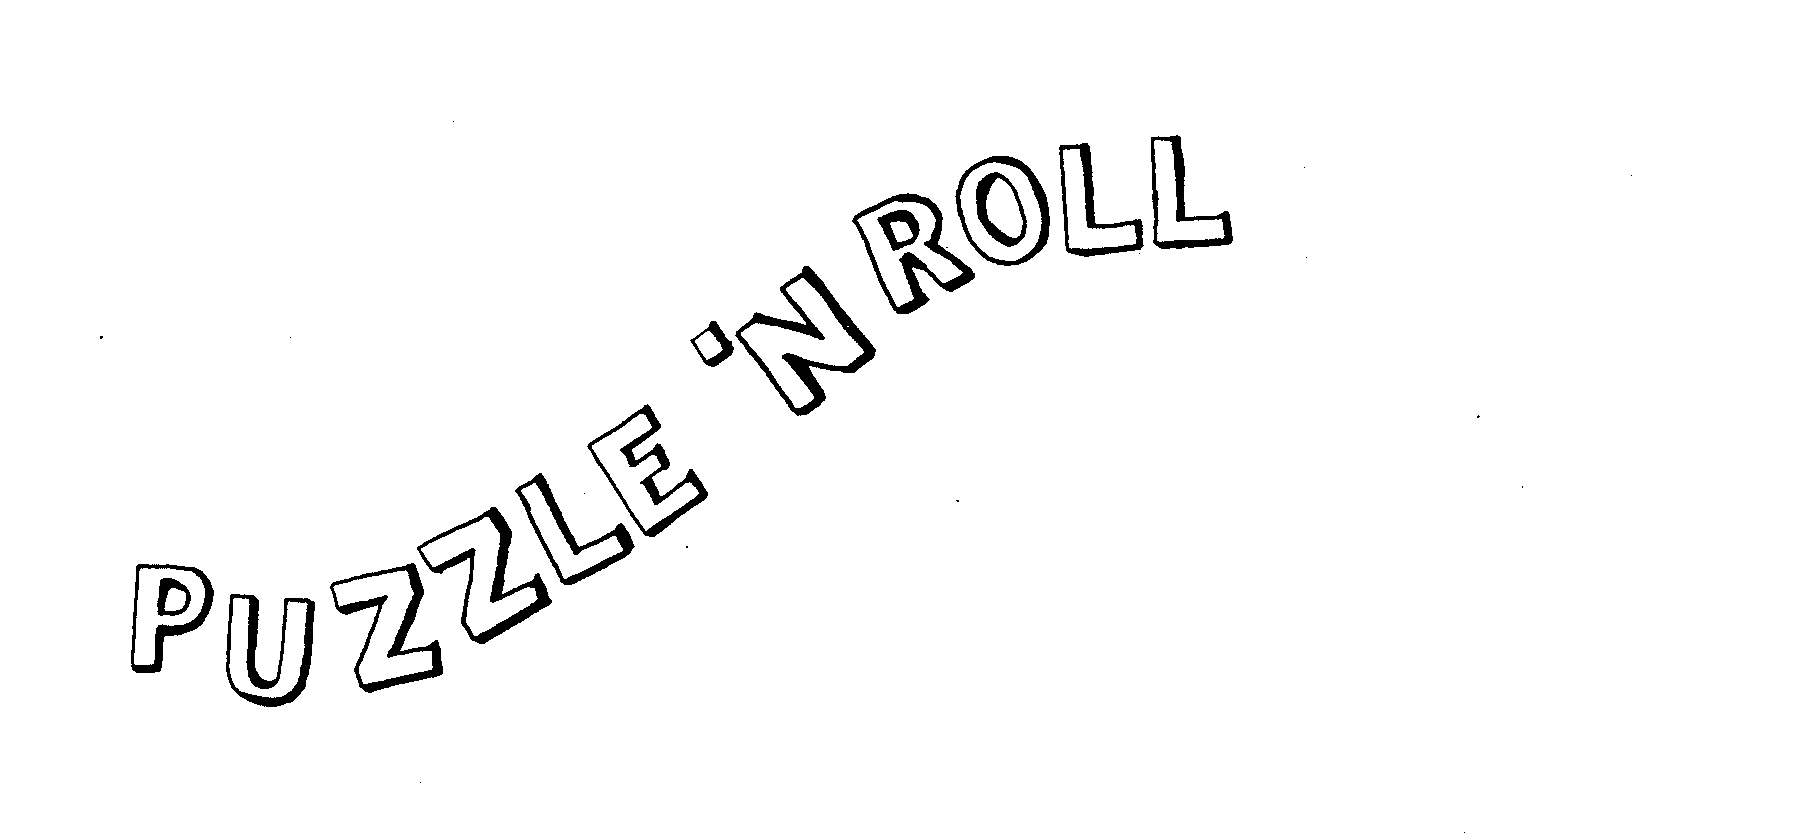  PUZZLE 'N ROLL